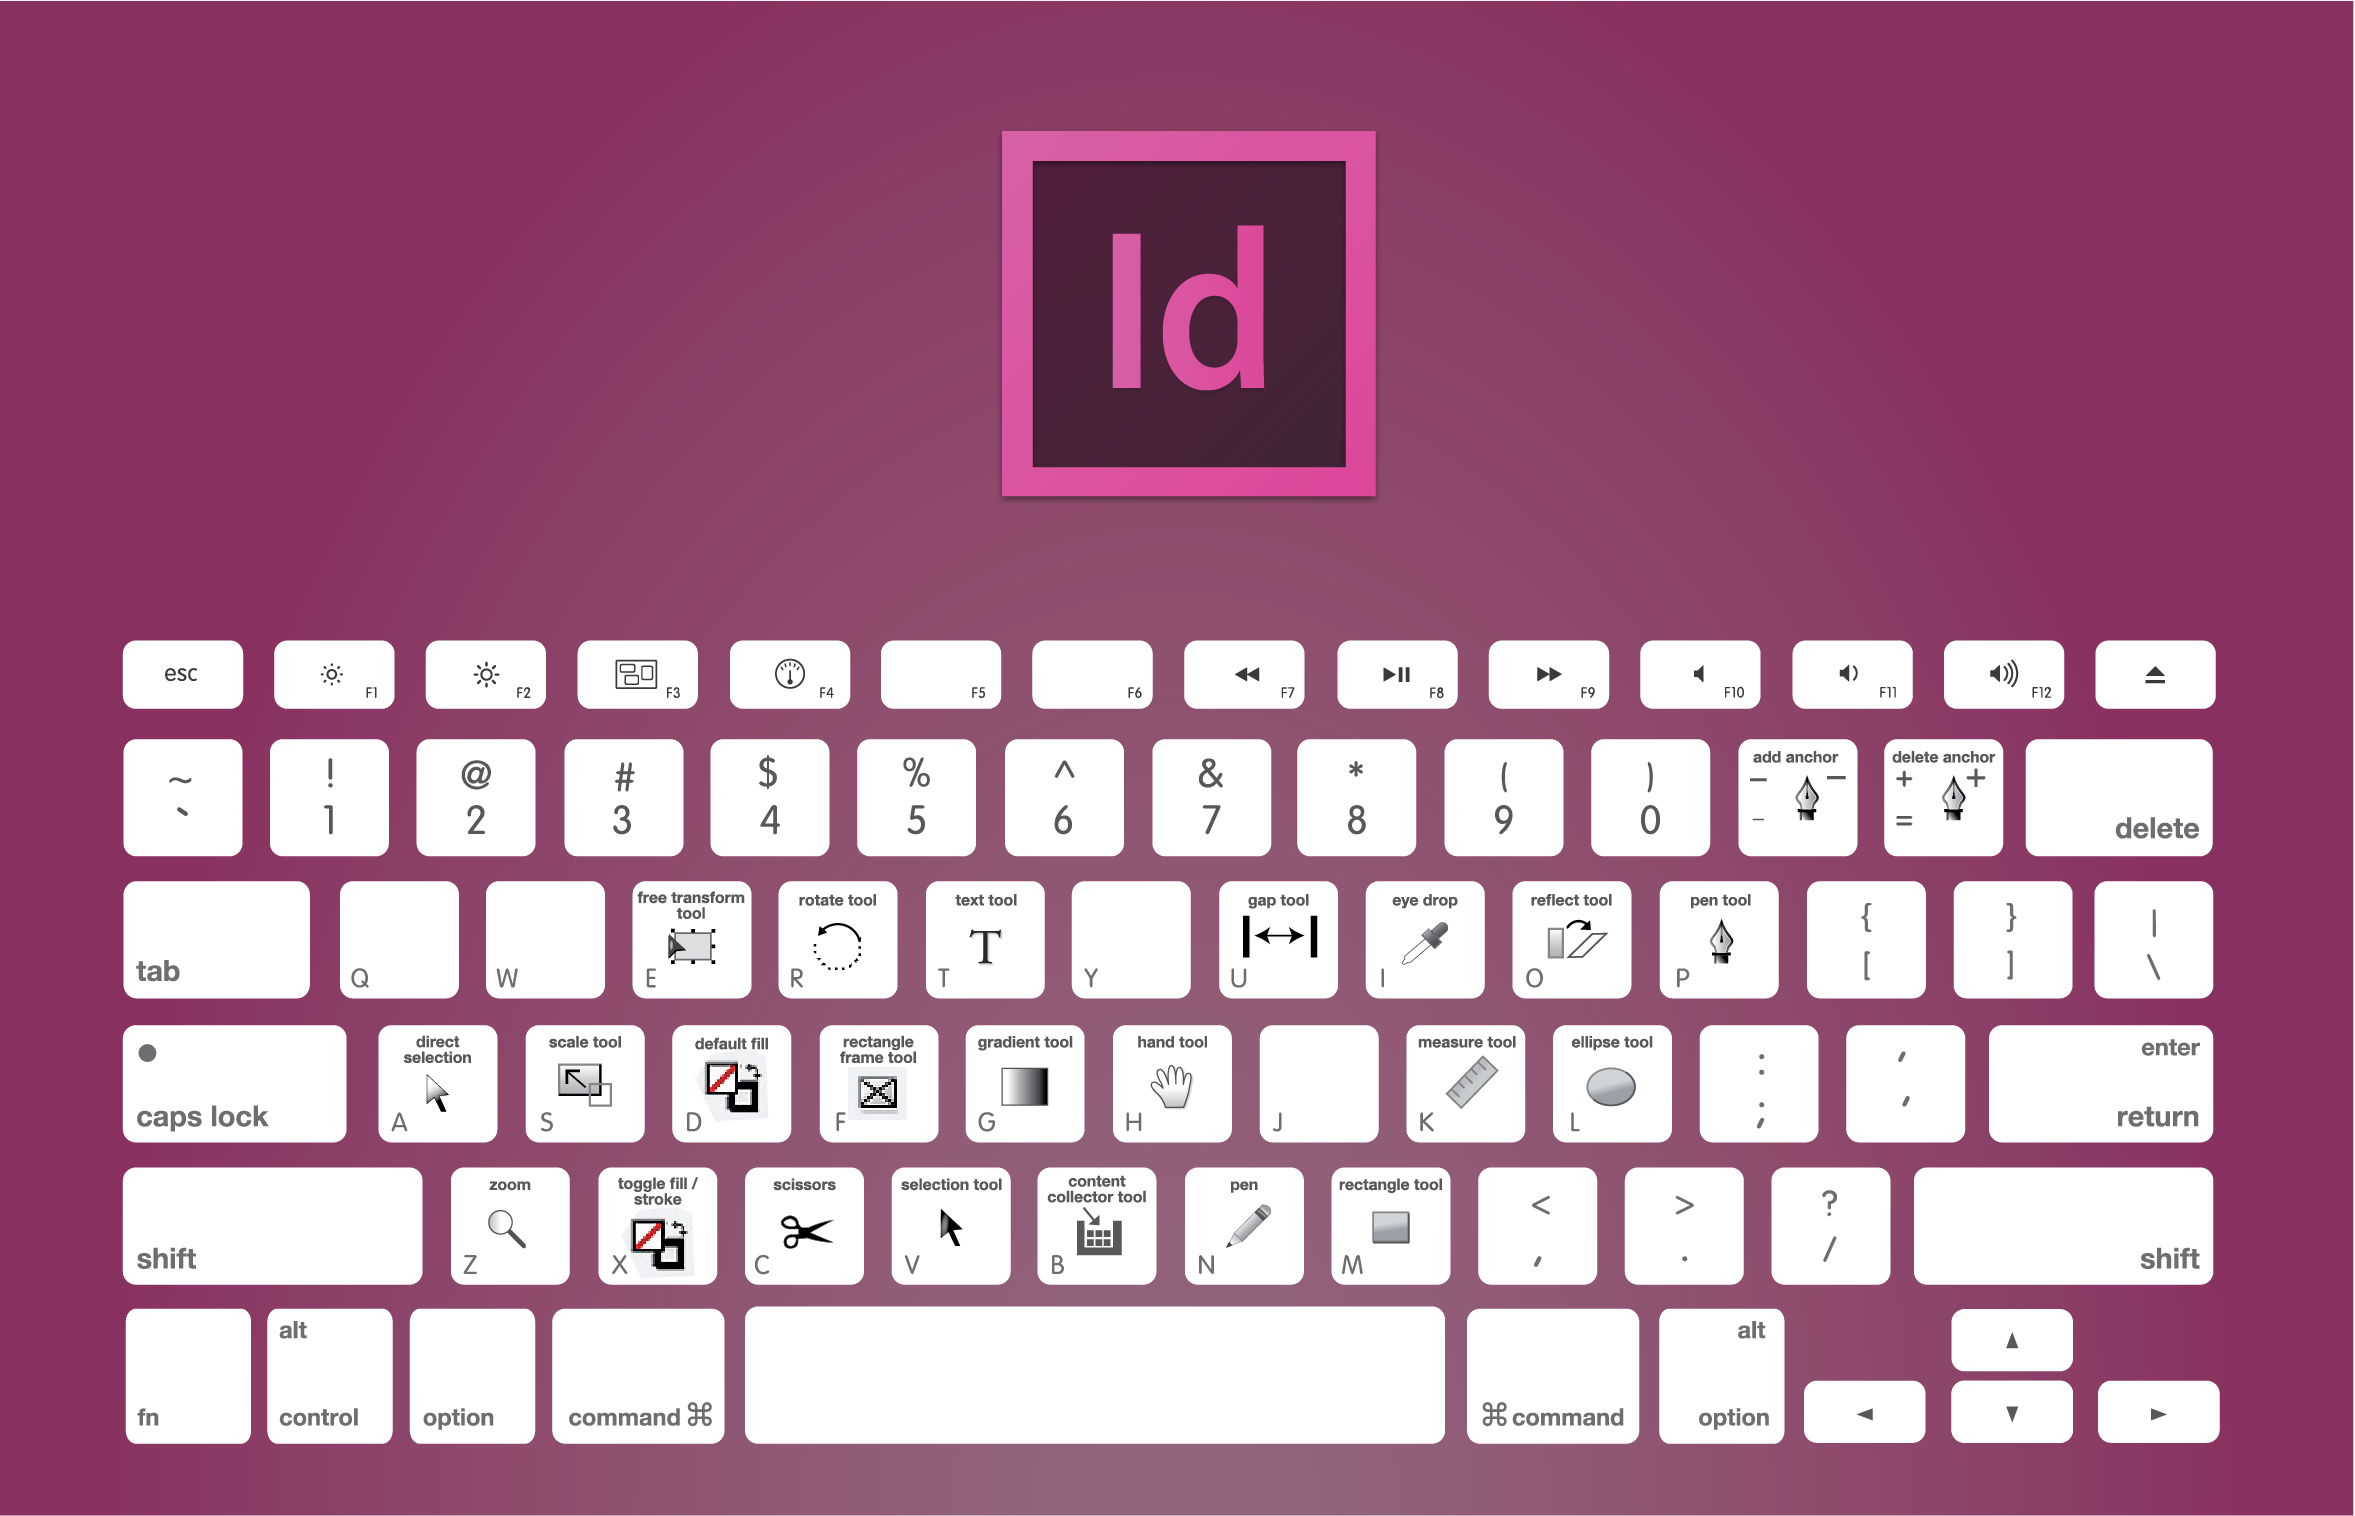 Chart of the keyboard shortcuts to use in Adobe InDesign: